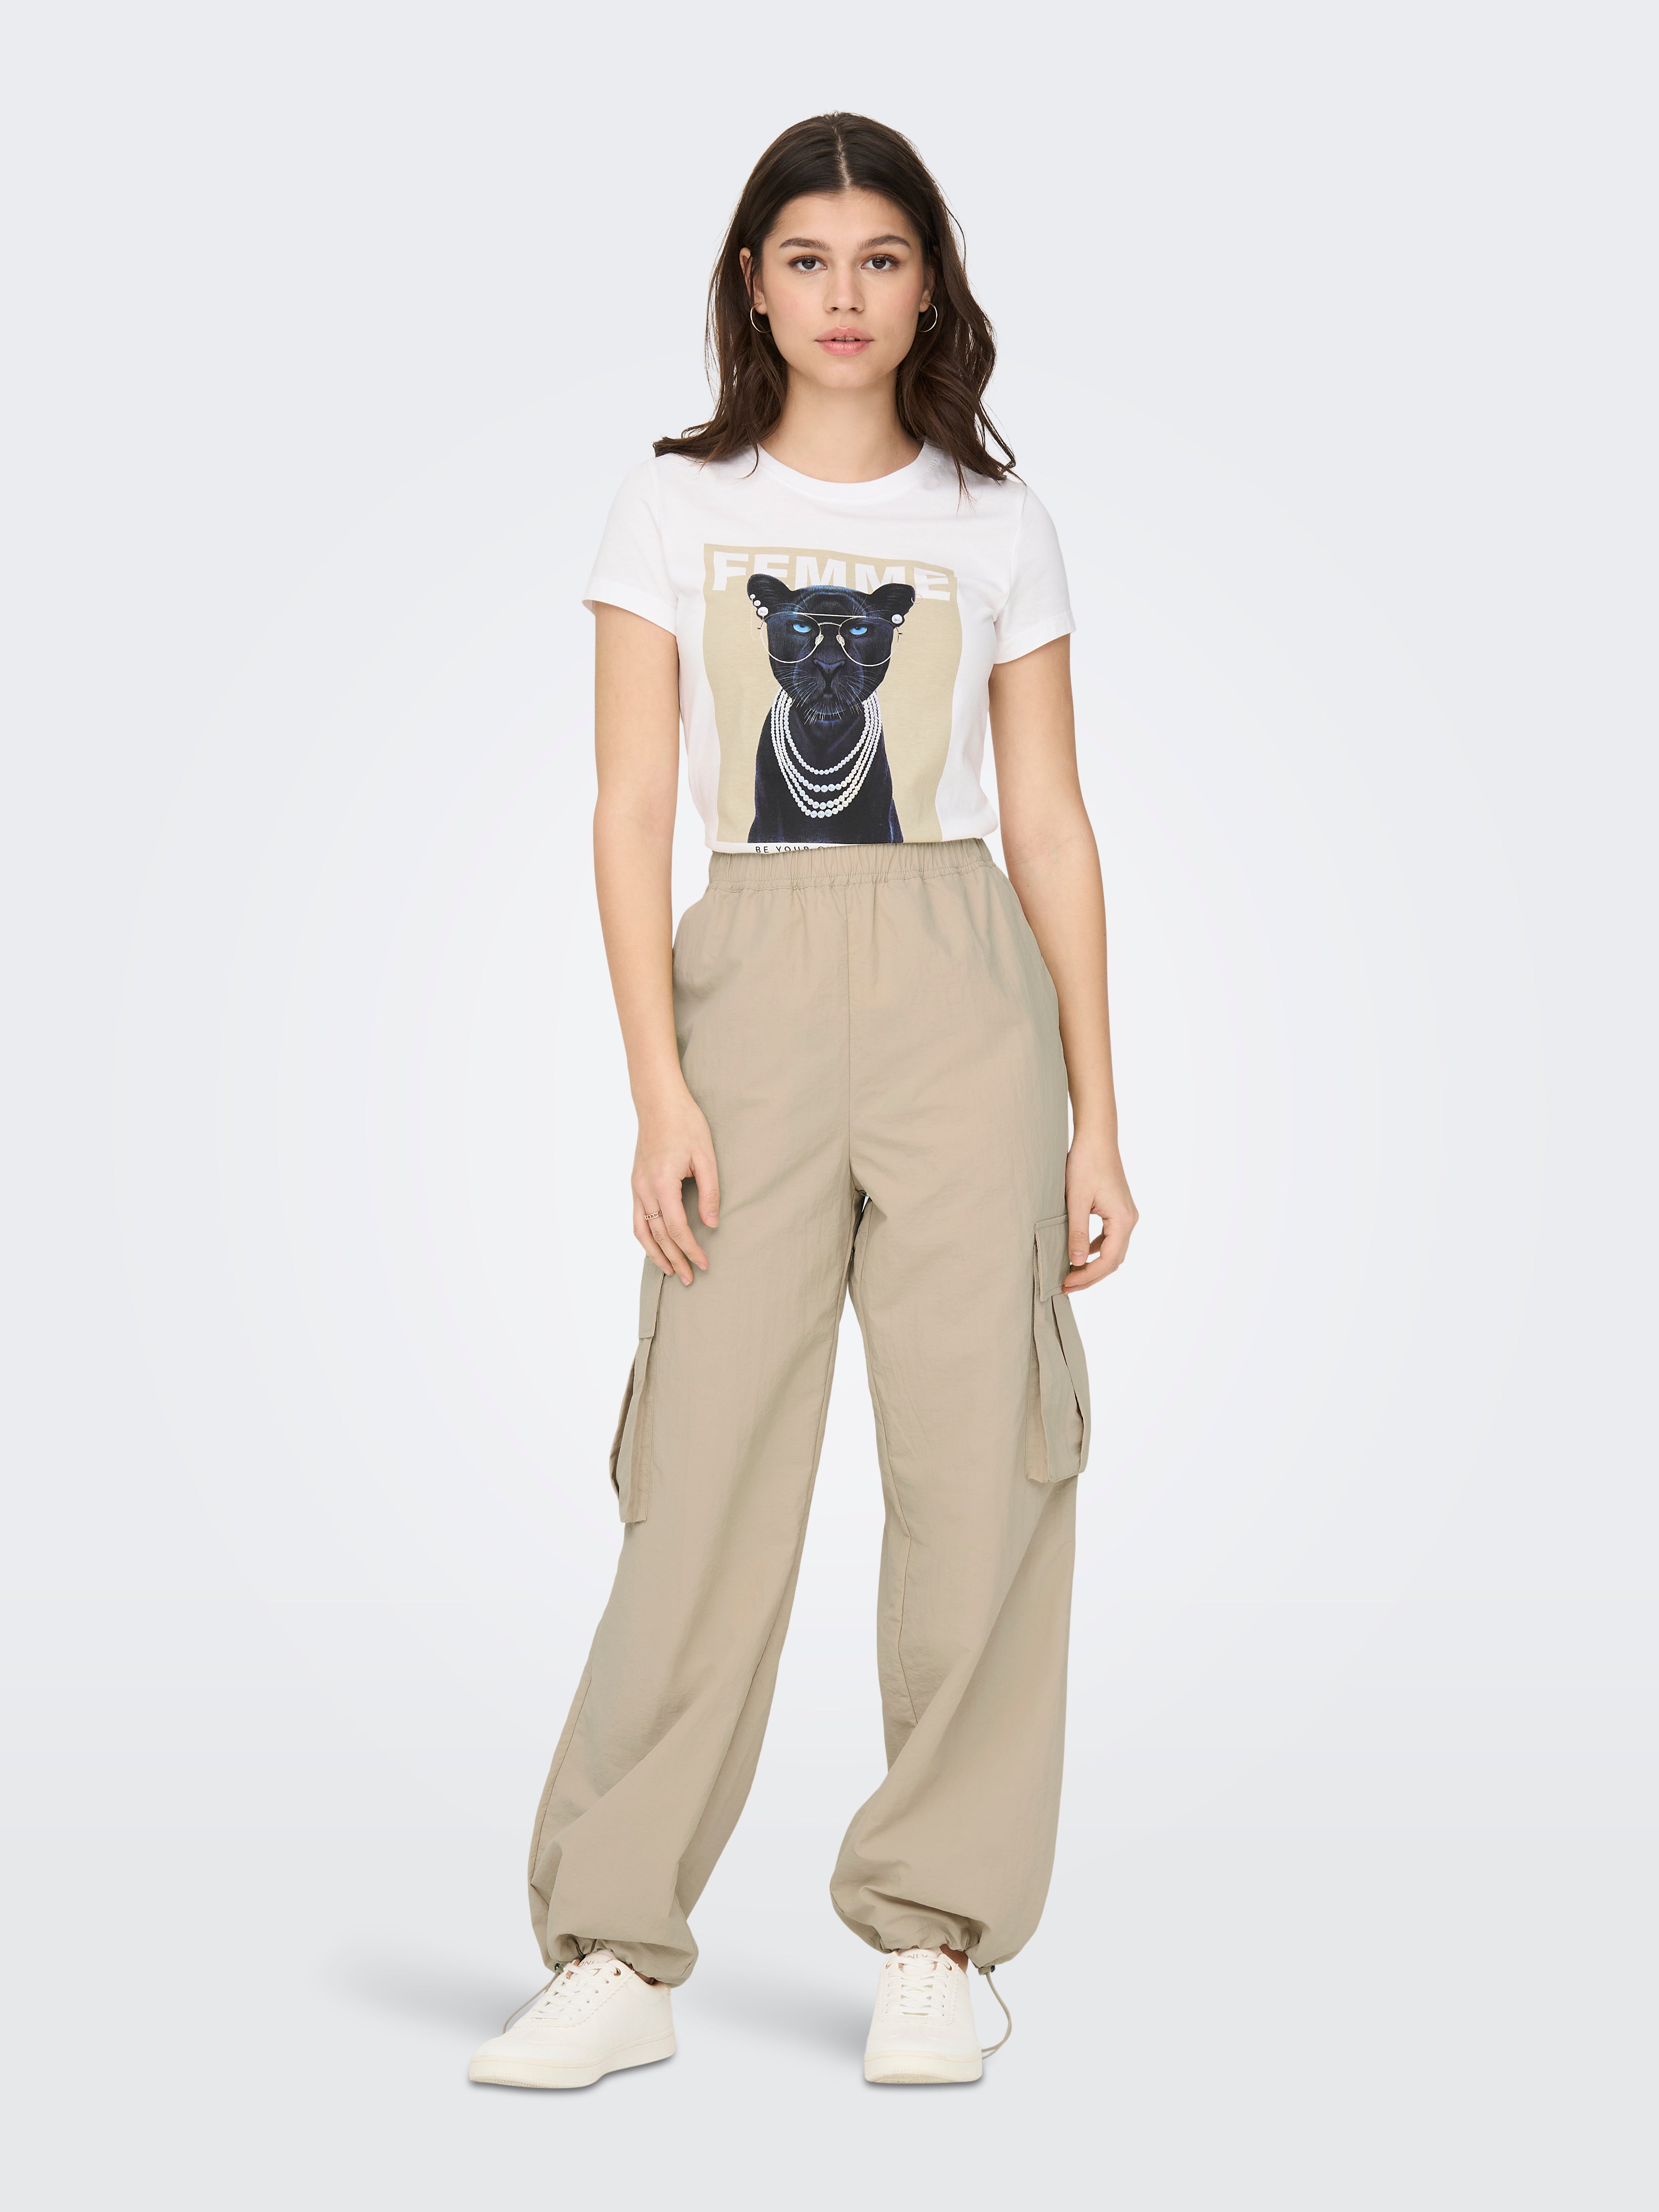 BoStreet Women Cream-Coloured Loose Fit Cargos Trousers Price in India,  Full Specifications & Offers | DTashion.com